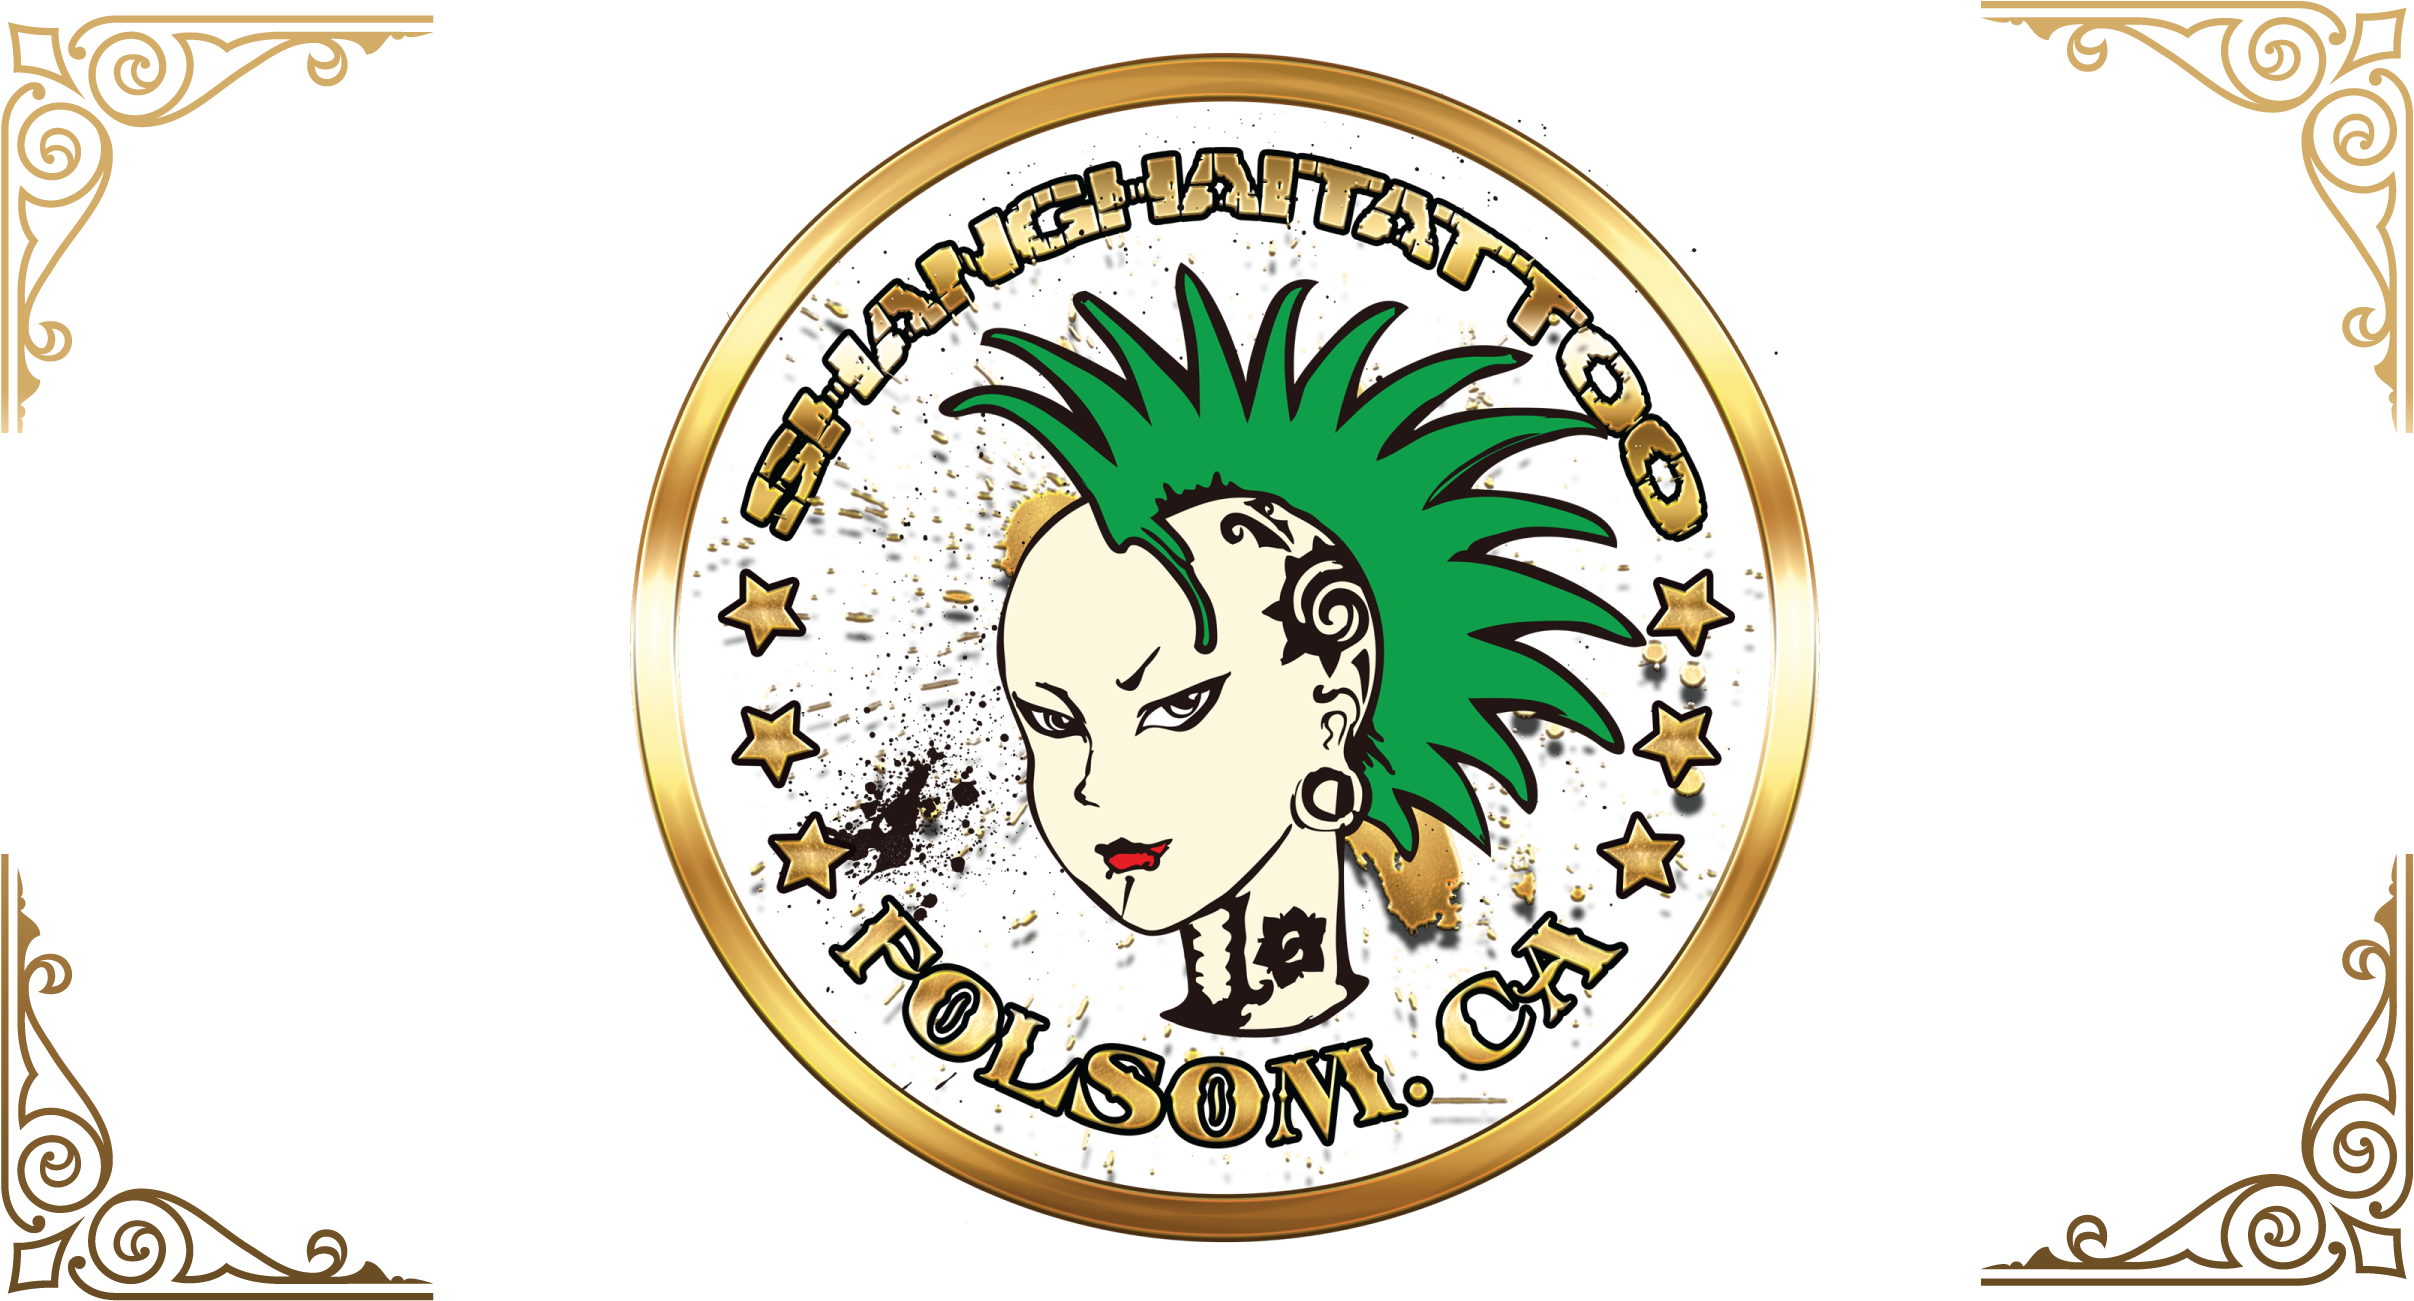 A Gold And Black Logo With A Cartoon Face And Green Spiky Hair